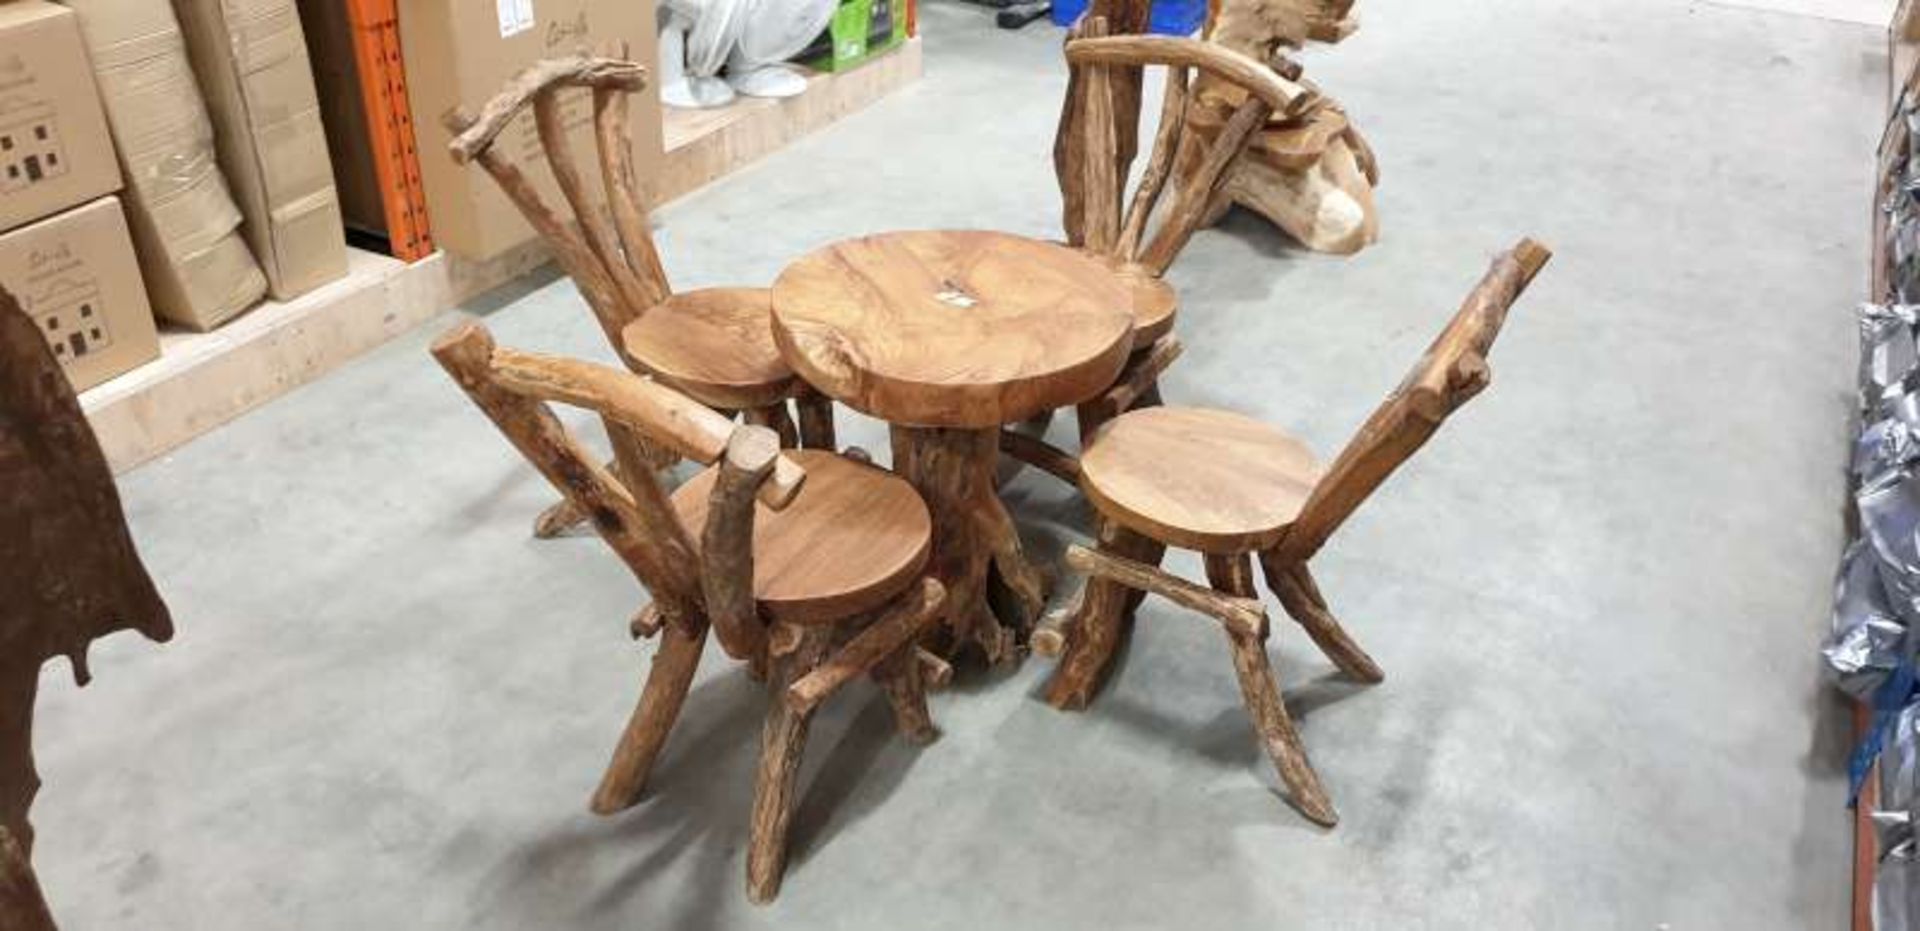 BRAND NEW SOLID TEAK COFFEE TABLE SET WITH 4 CHAIRS SIZE 60 X 60 X 55 CM RRP £1295